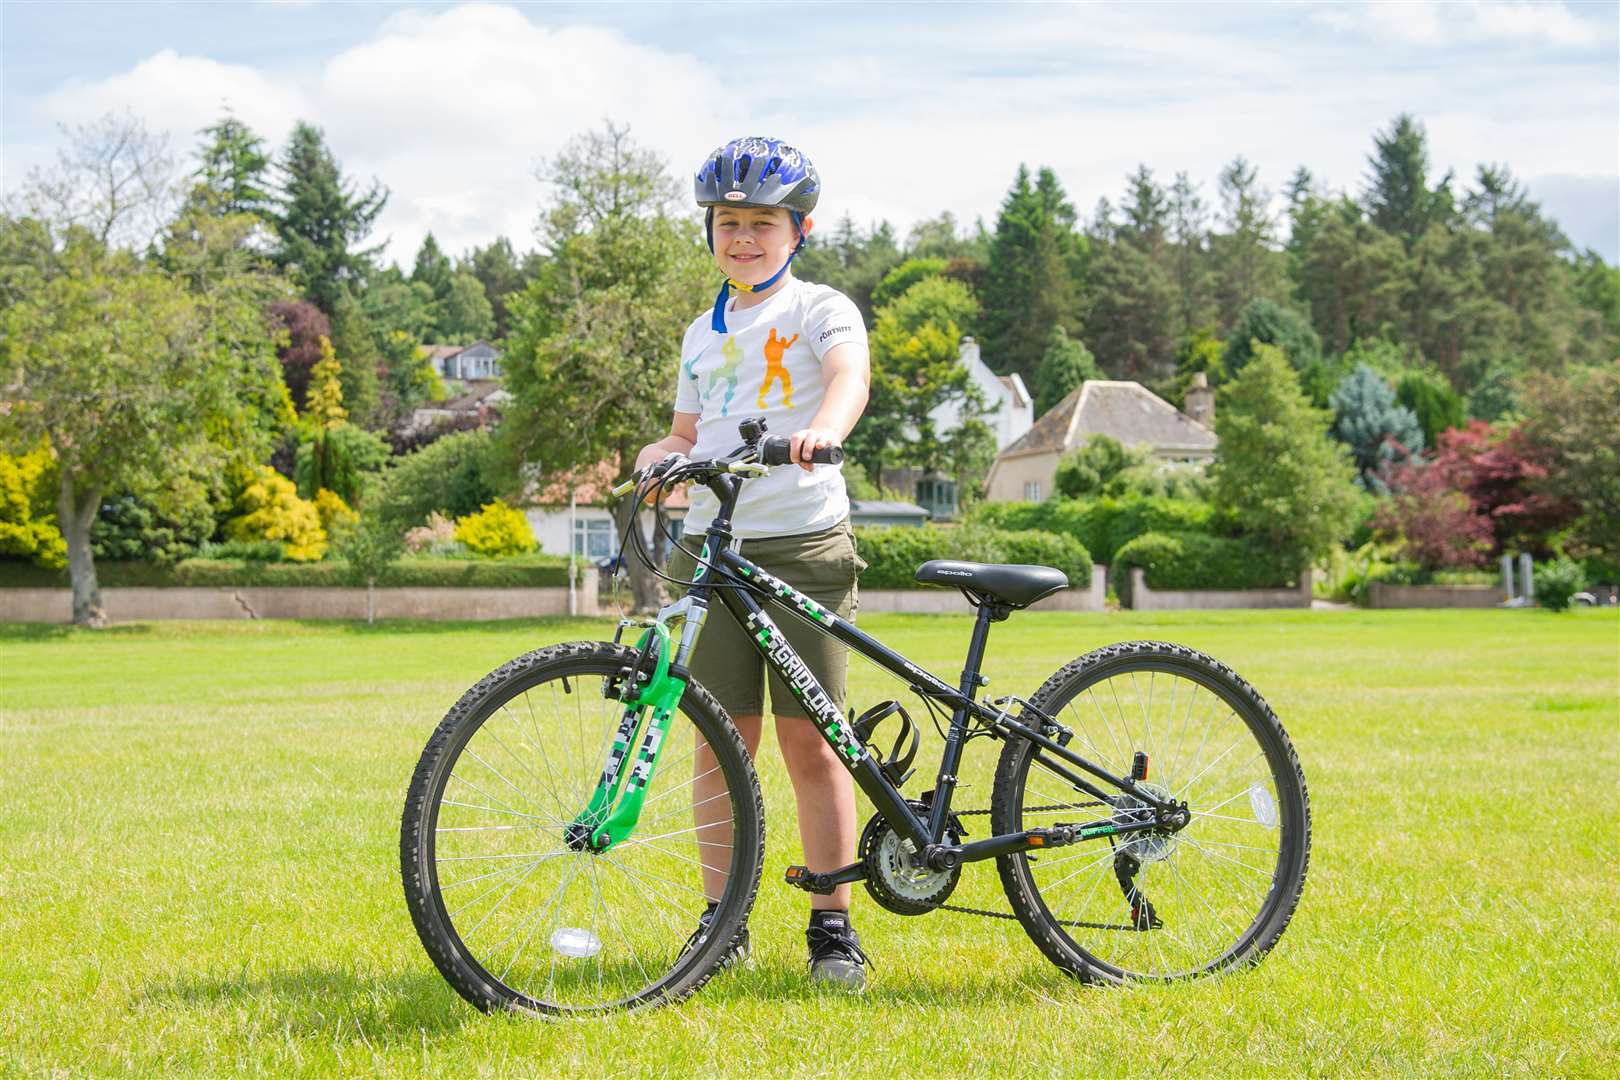 8-year-old Kristian Ross, from Forres, is cycling the distance from his home to Edinburgh Zoo as he raises money for the Highland Wildlife Park. Picture: Daniel Forsyth.